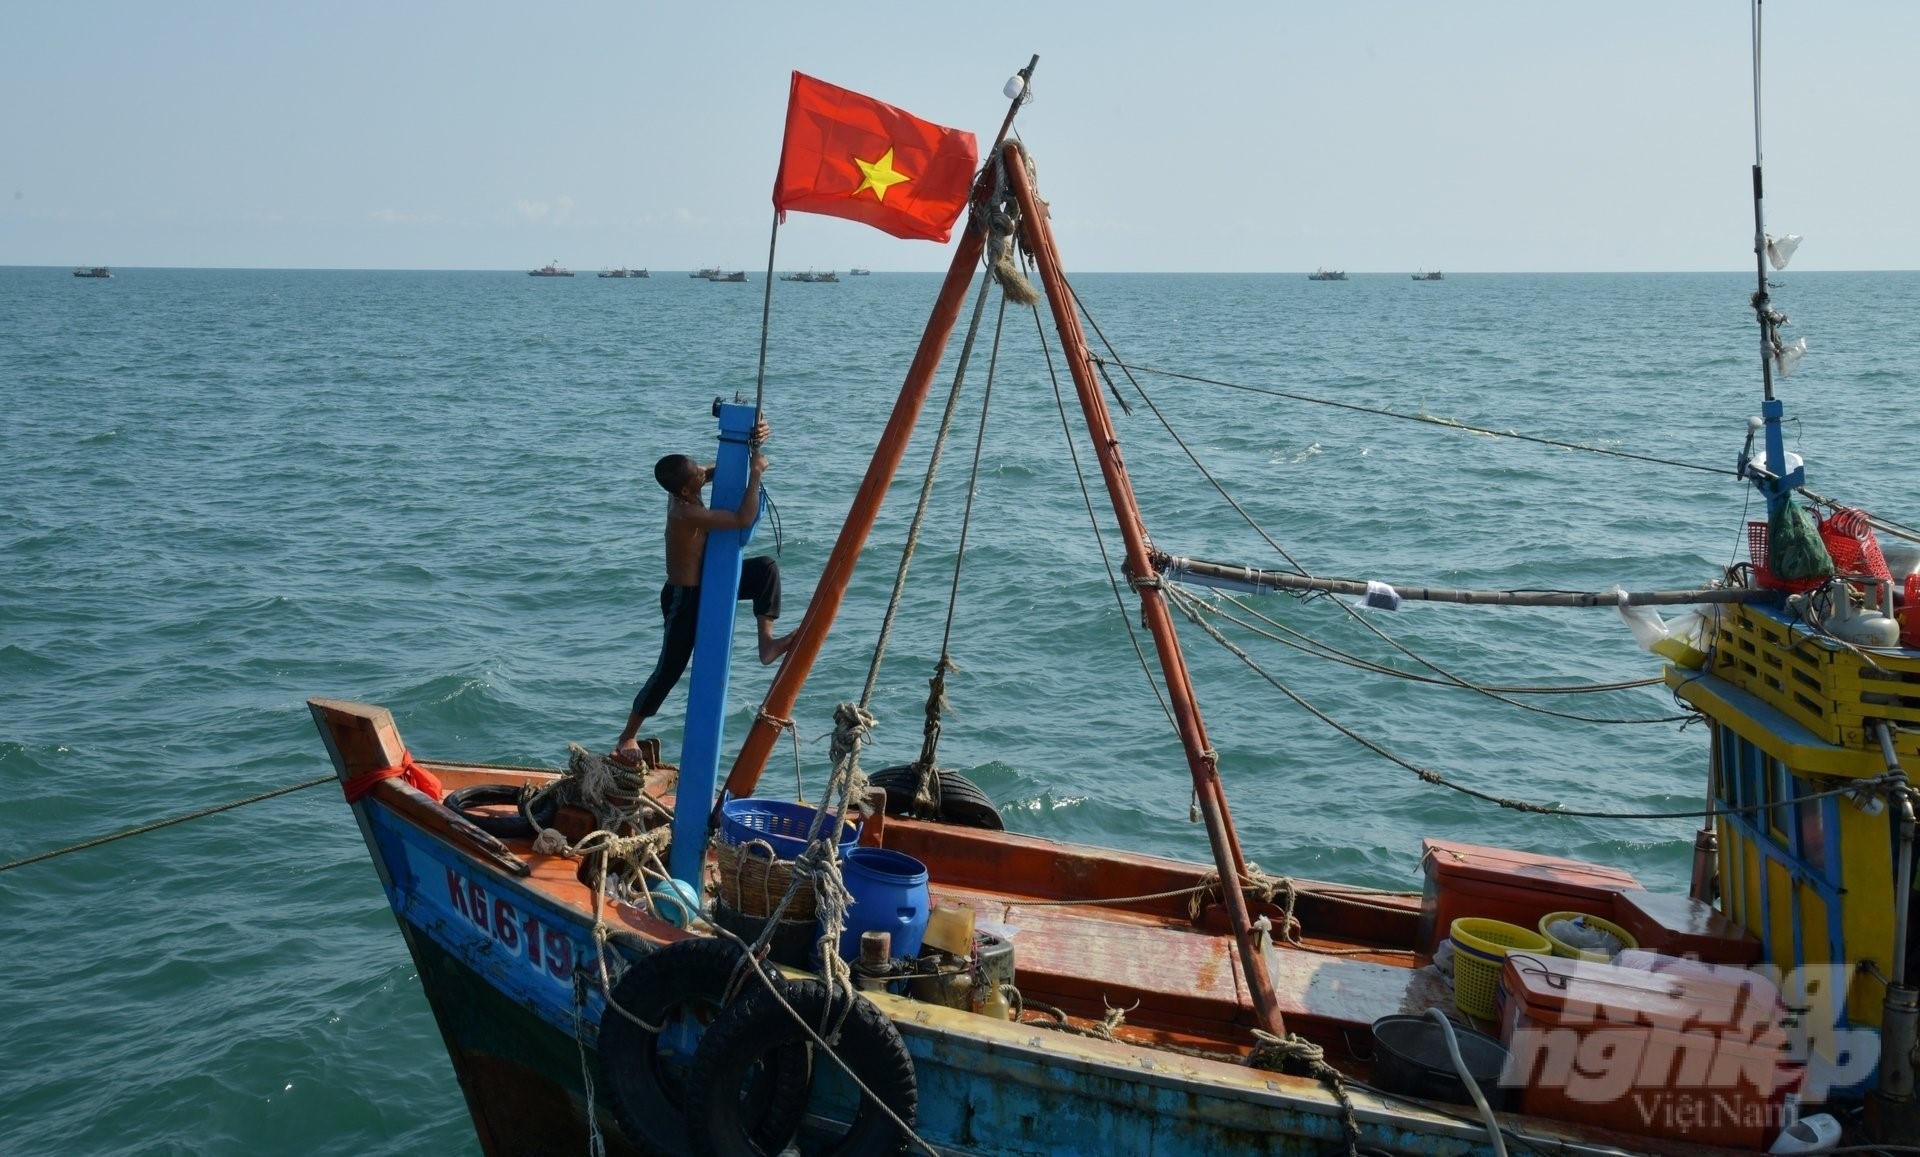 According to the plan, the EC’s Inspection Delegation is expected to come to Vietnam to work on combating illegal, unreported, and unregulated fishing from October 10–18. Photo: Thanh Cuong.